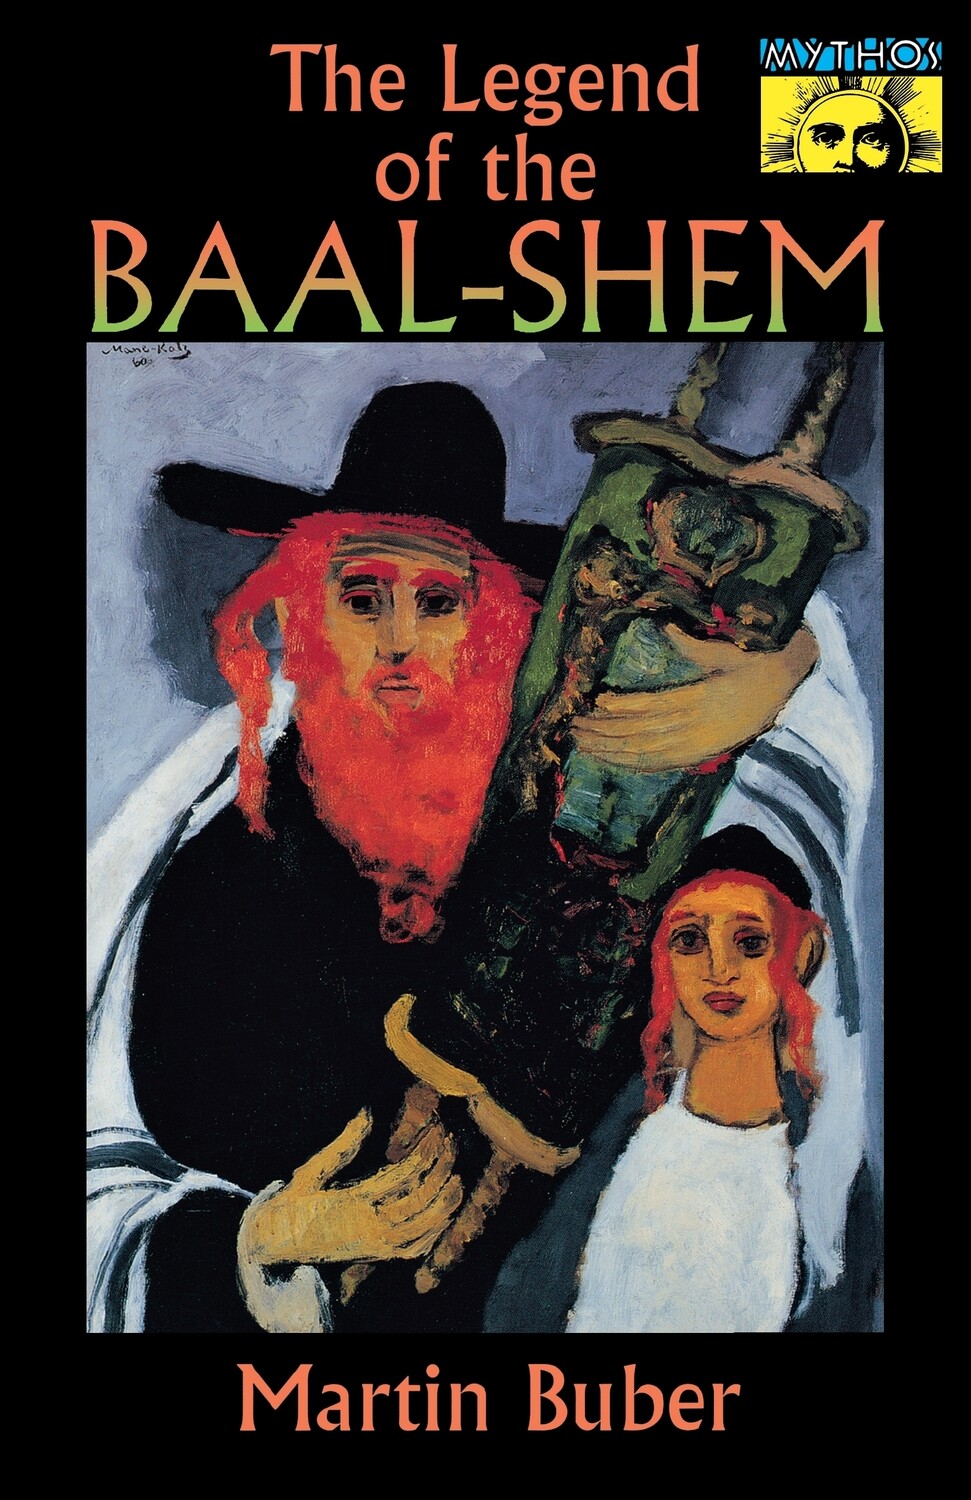 The Legend of the Baal-Shem by Martin Buber